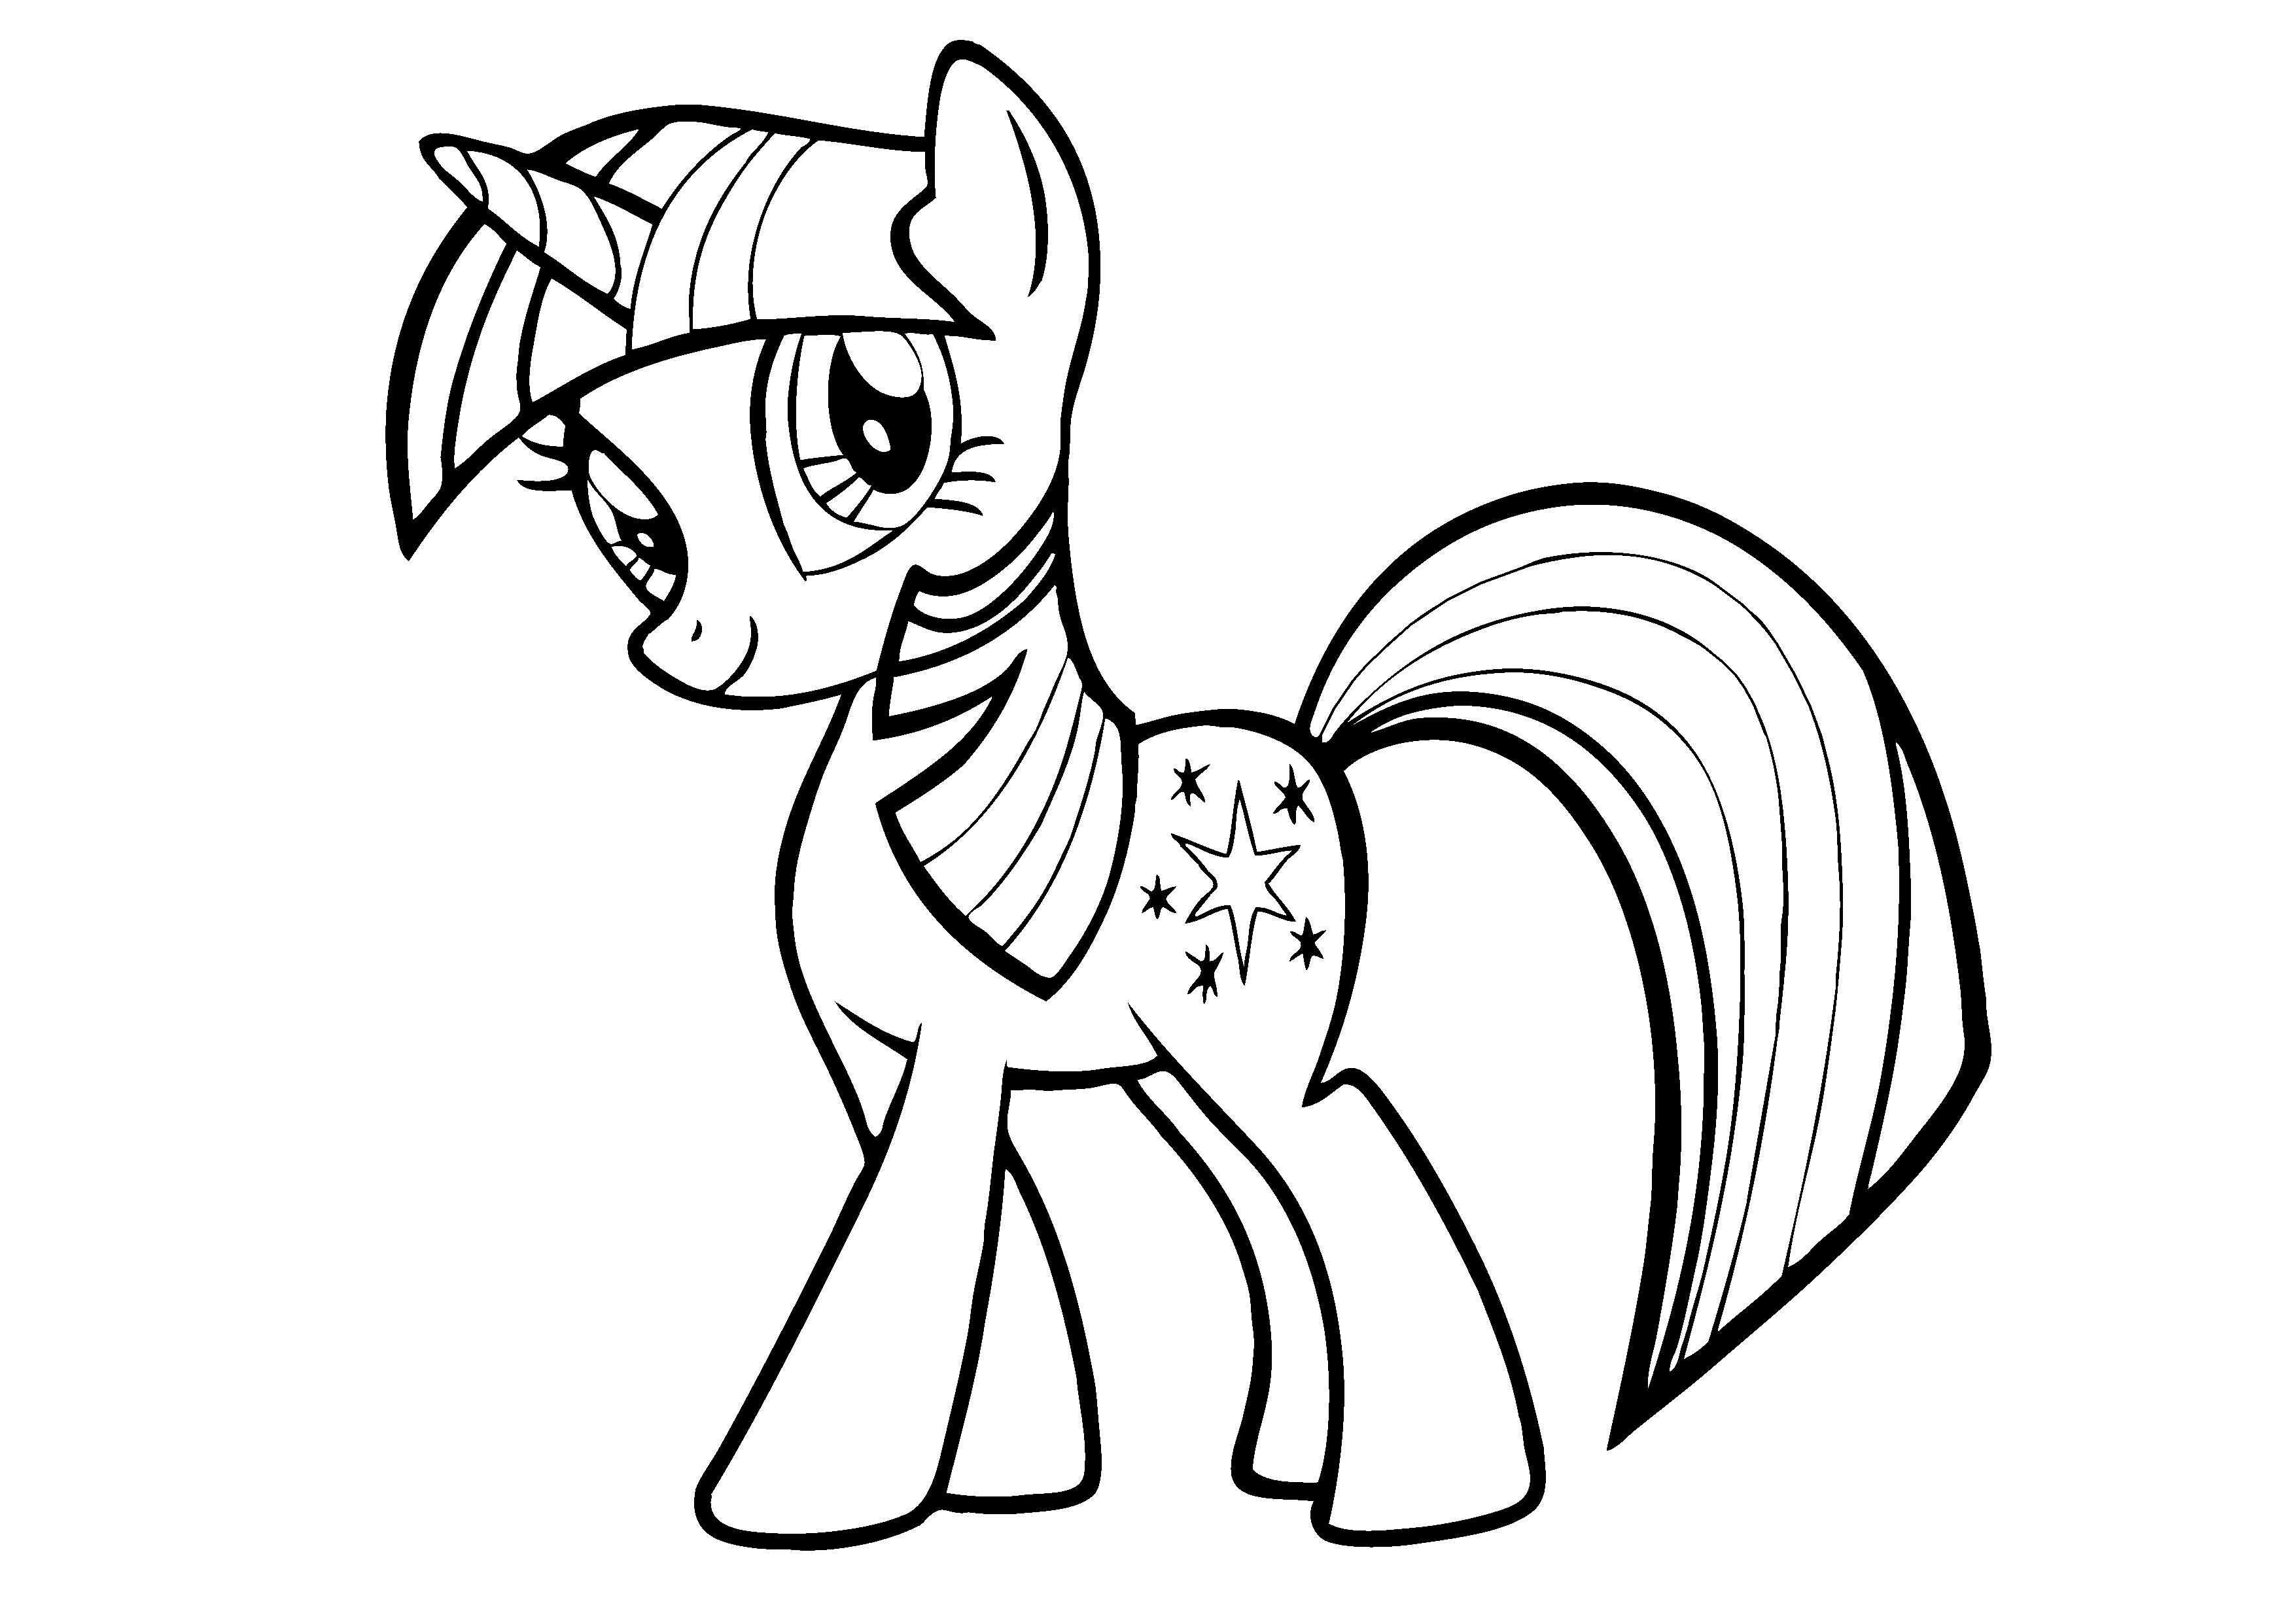 How to draw a Pony Horse tutorial